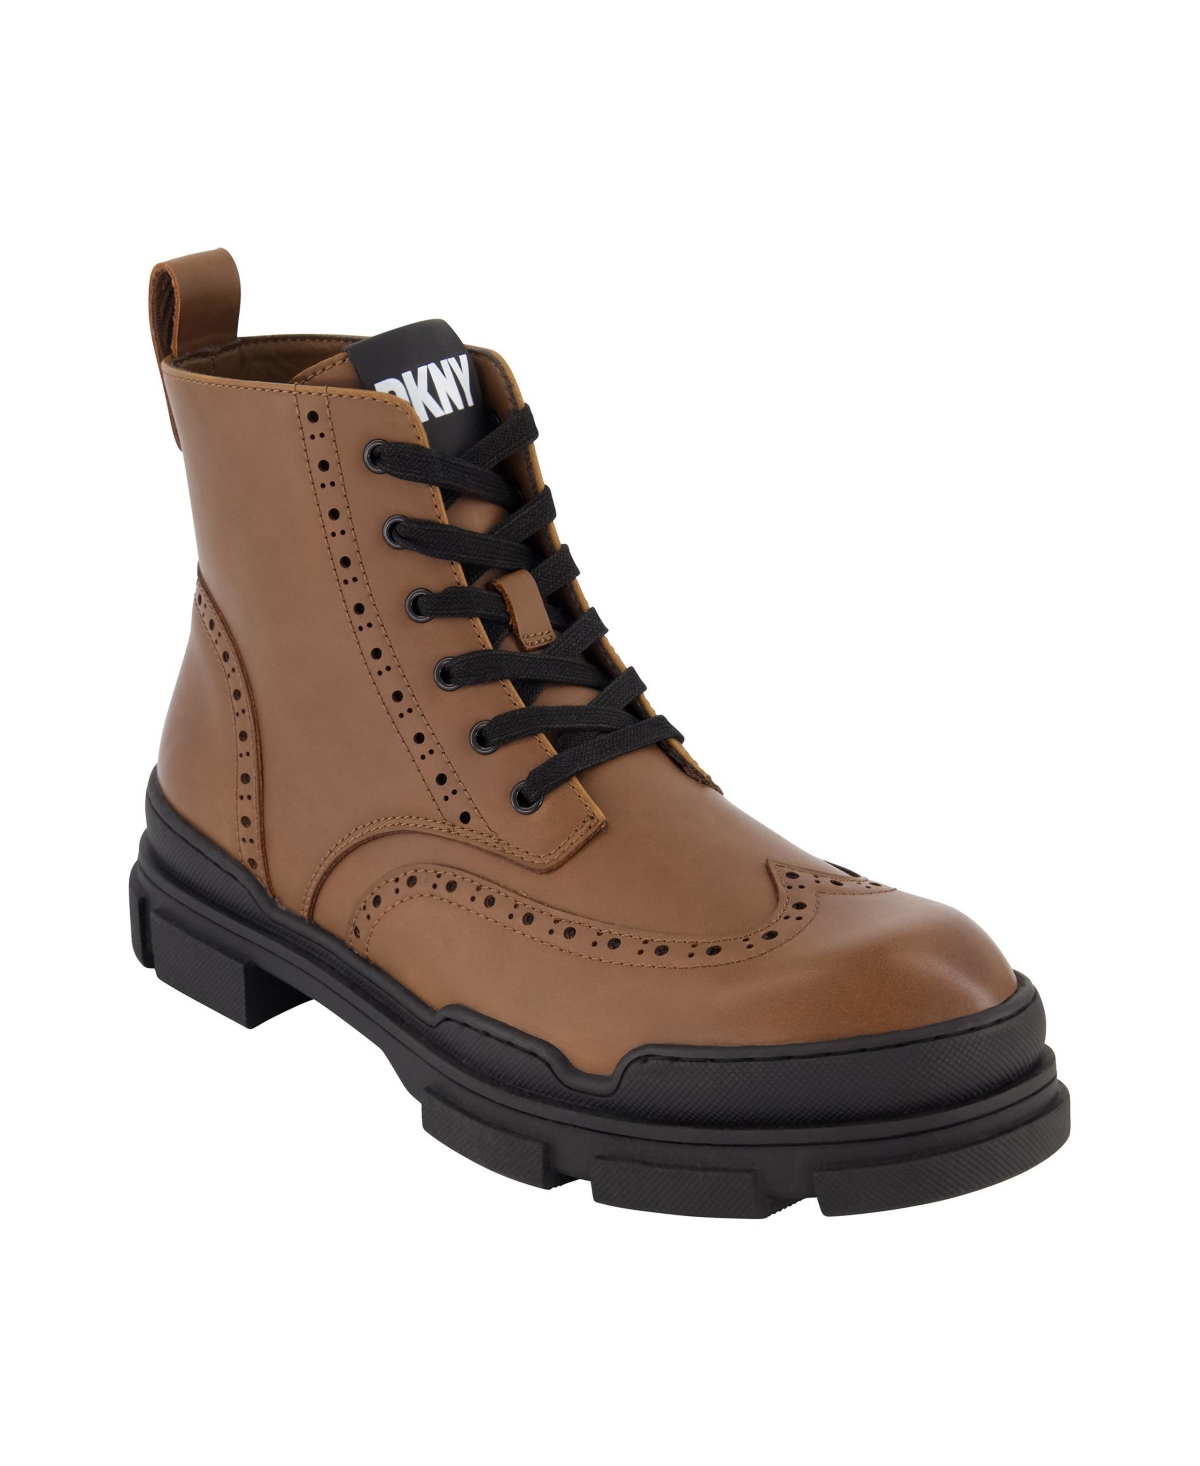 DKNY MEN'S PERFORATED RUBBER LUG SOLE WINGTIP BOOTS